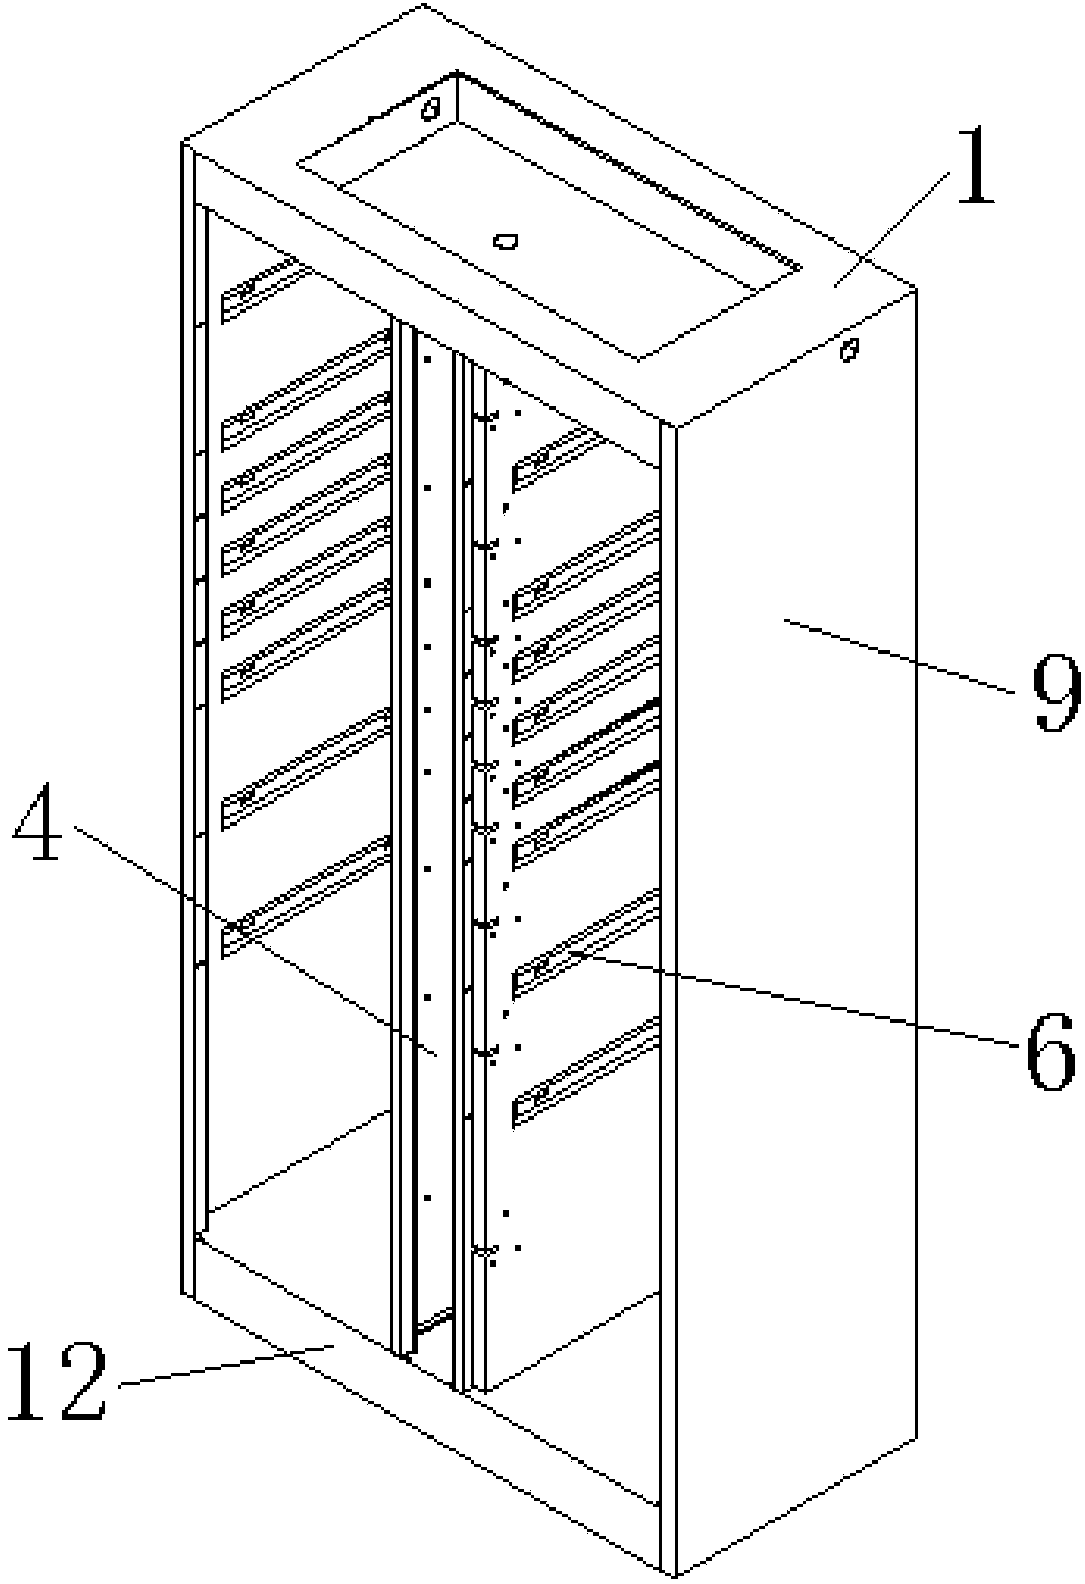 Box body structure with intelligent storing and taking function